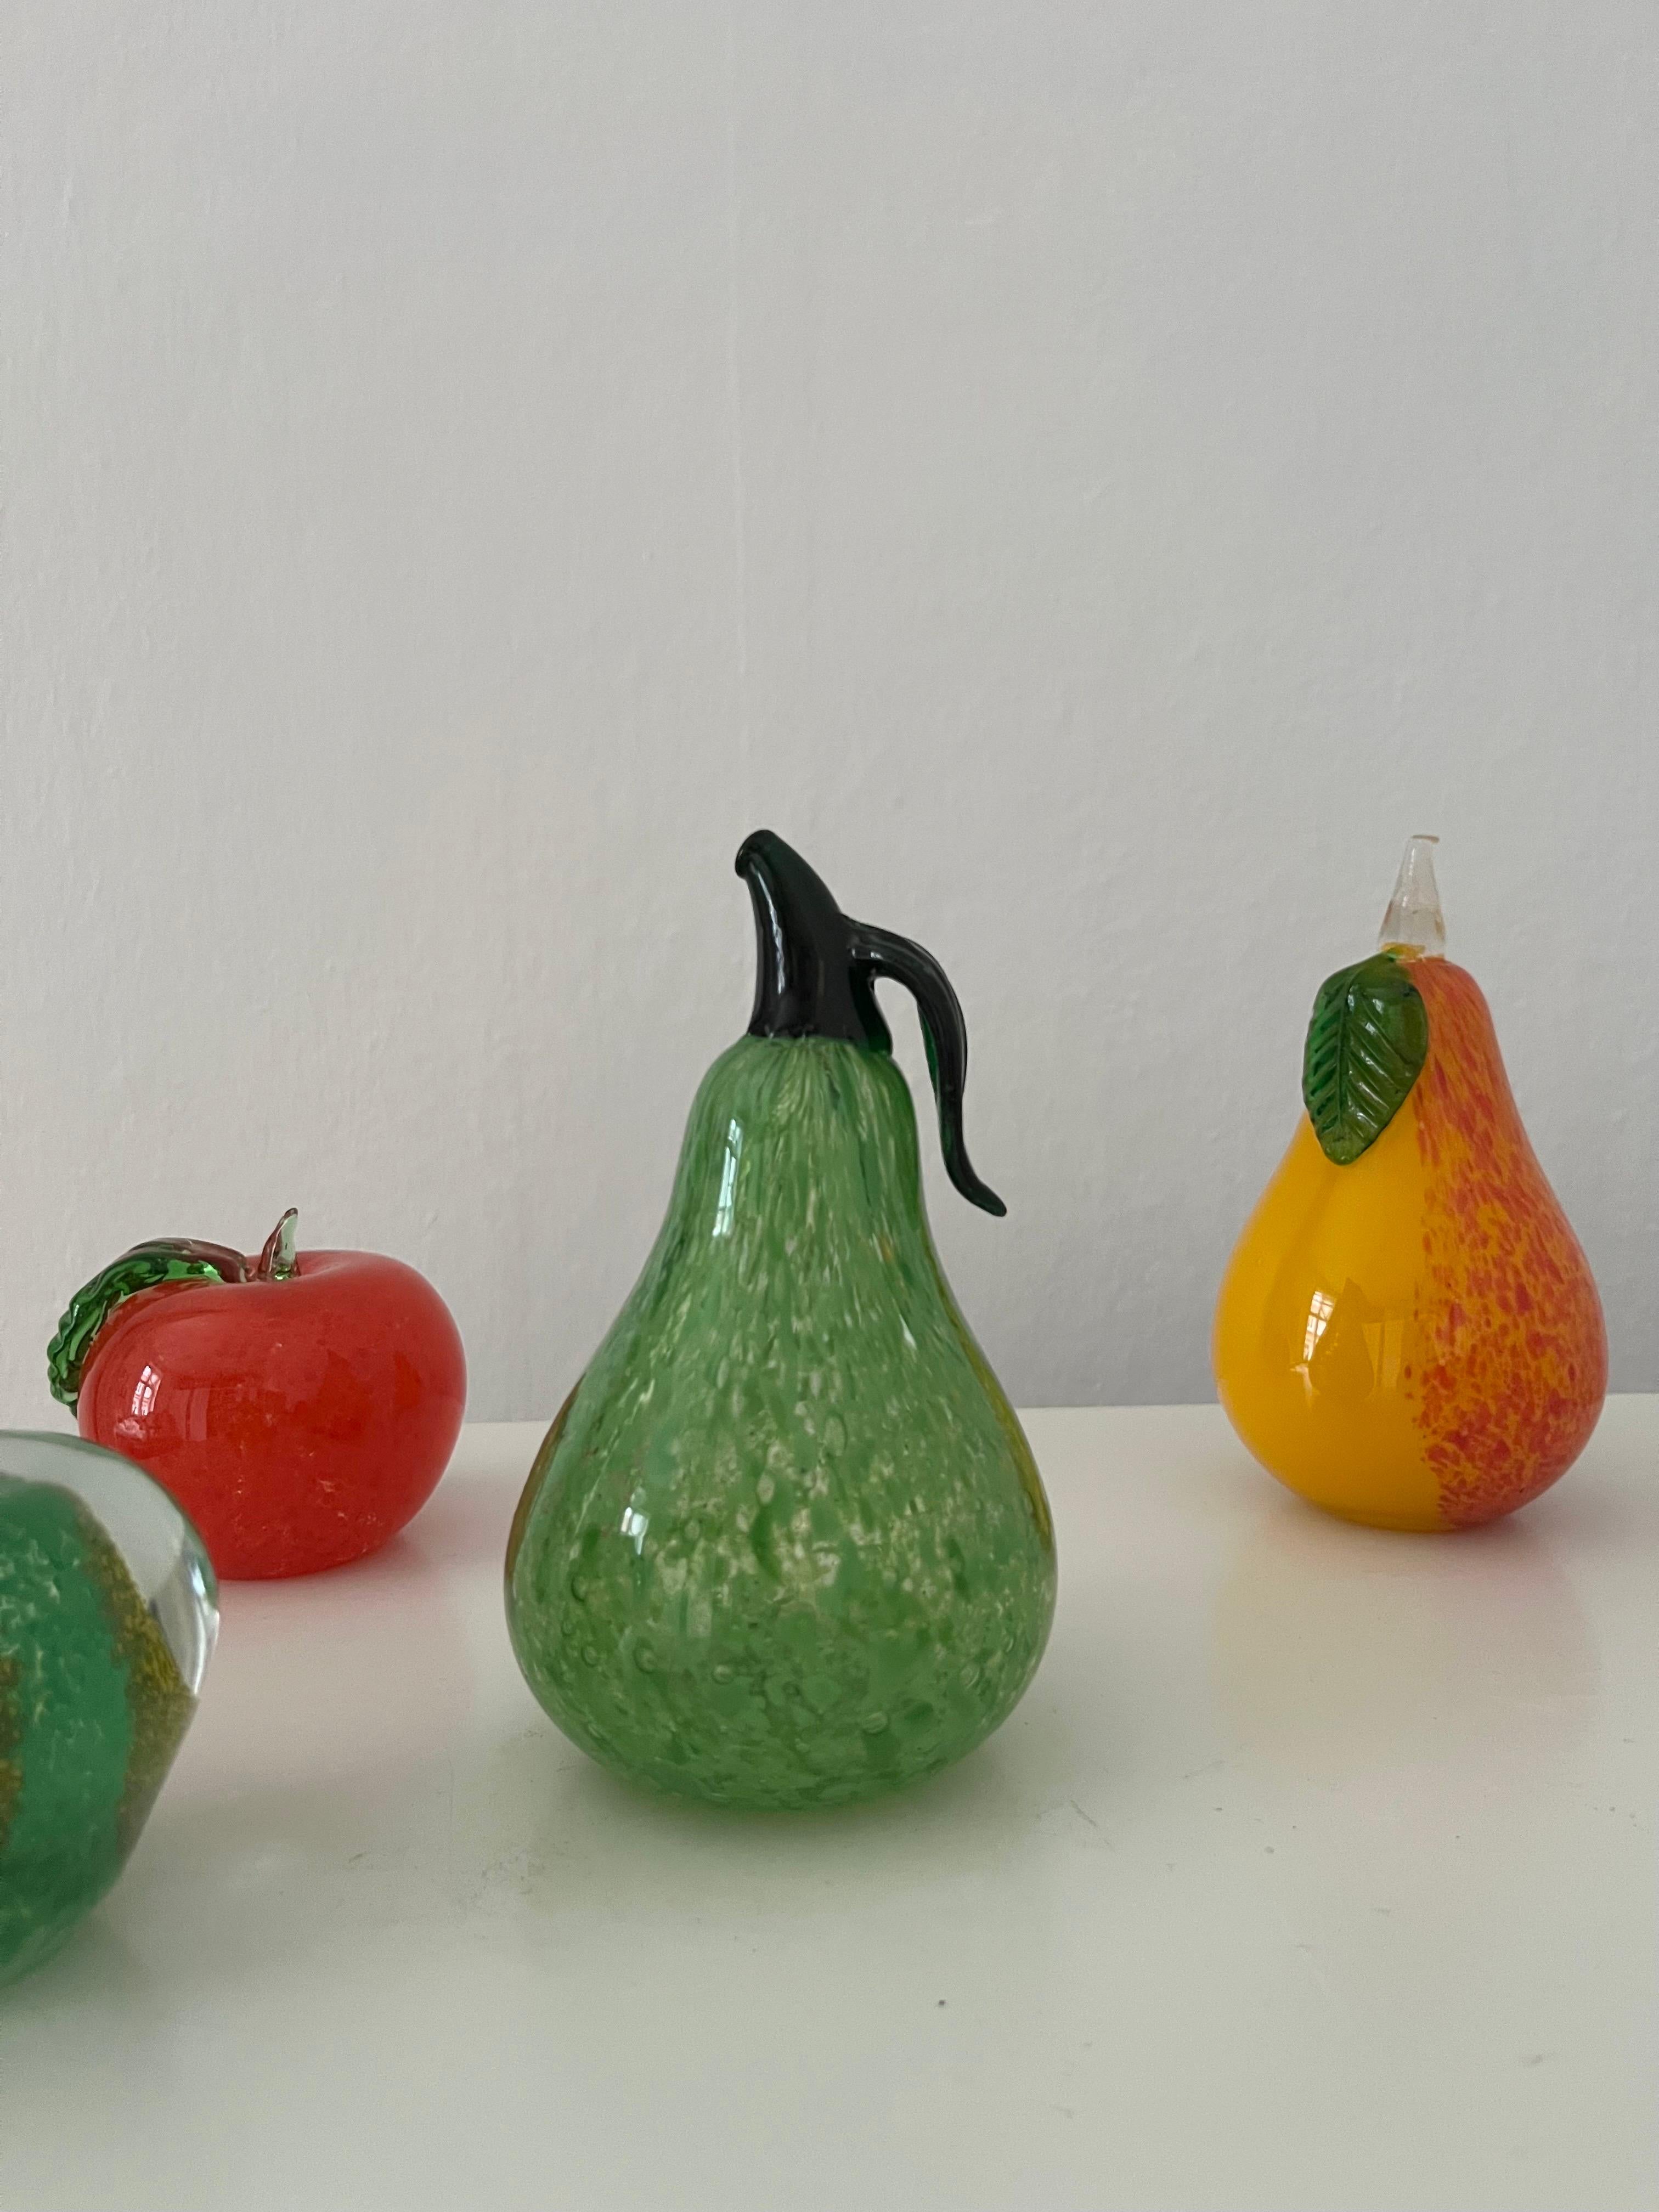 Set of 5 vintage heavy decorative glass fruits. Swedish glass art. 
Elevate your space with this set of five meticulously crafted glass treasures, each measuring between 7 and 12 cm. This collection features enchanting representations of 2 pears, 2